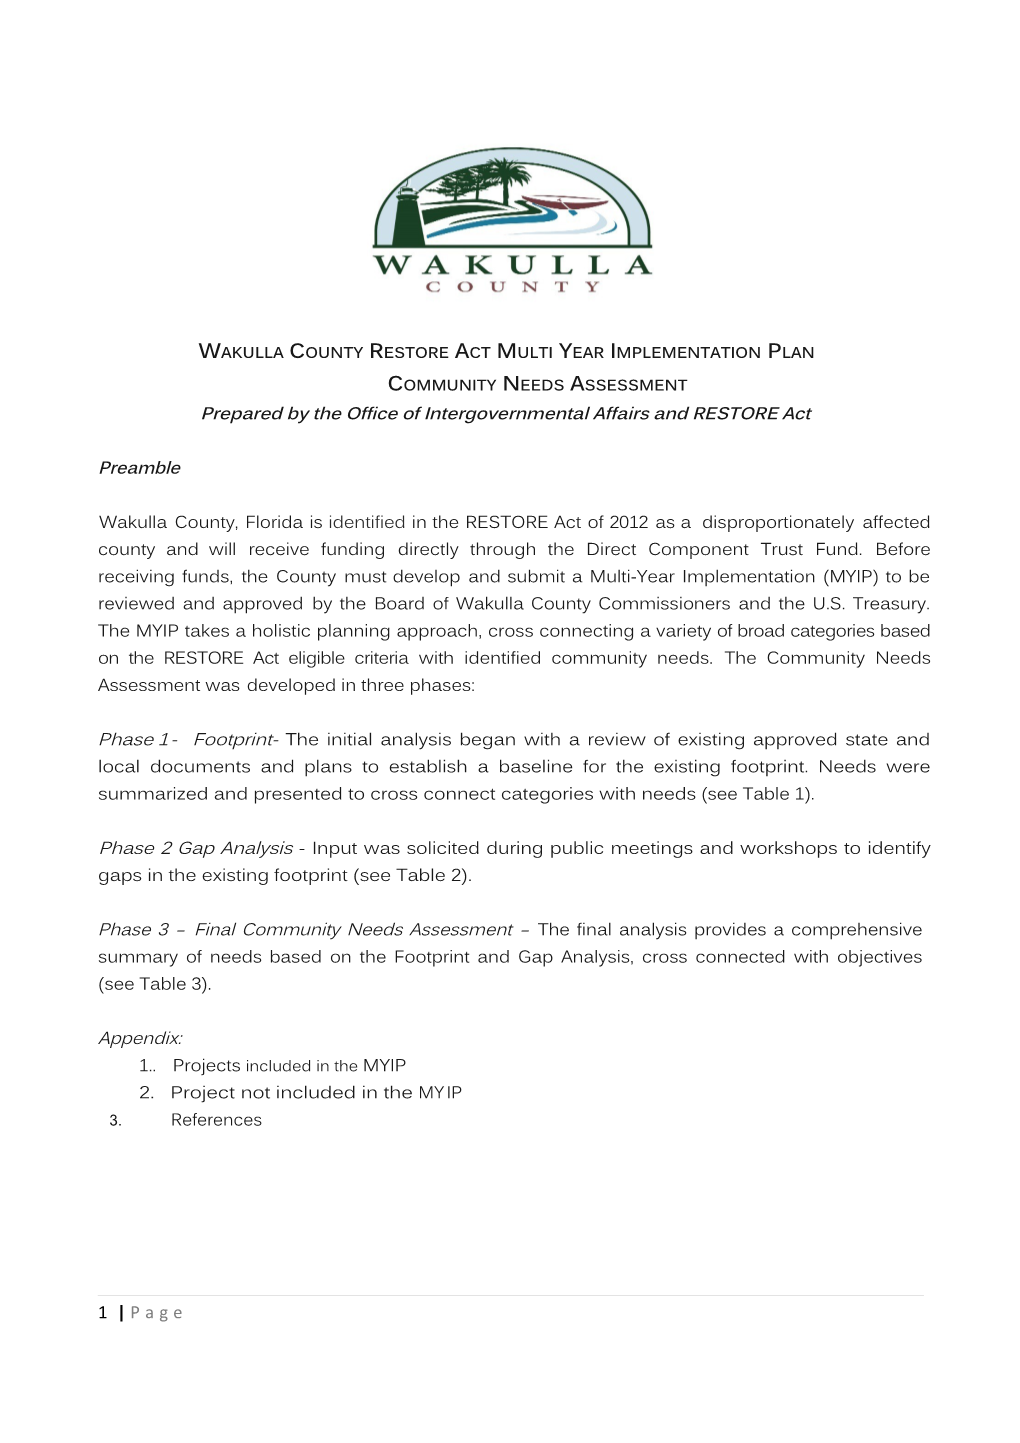 Wakulla County Restore Act Multi Year Implementation Plan